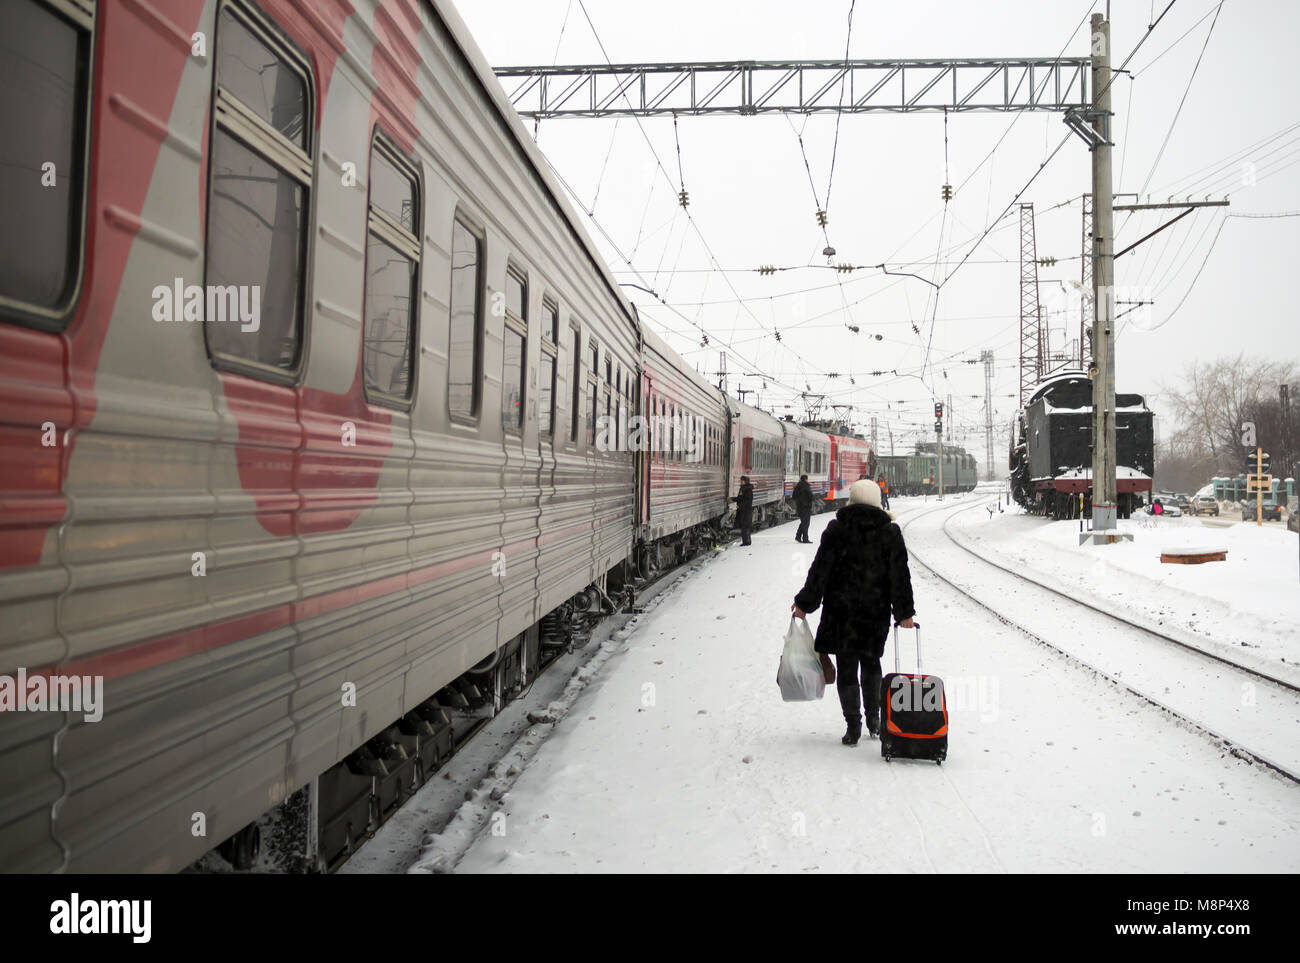 Petrozavodsk, Russia - January 15, 2016: The passenger is on the train station platform winter along the train Stock Photo